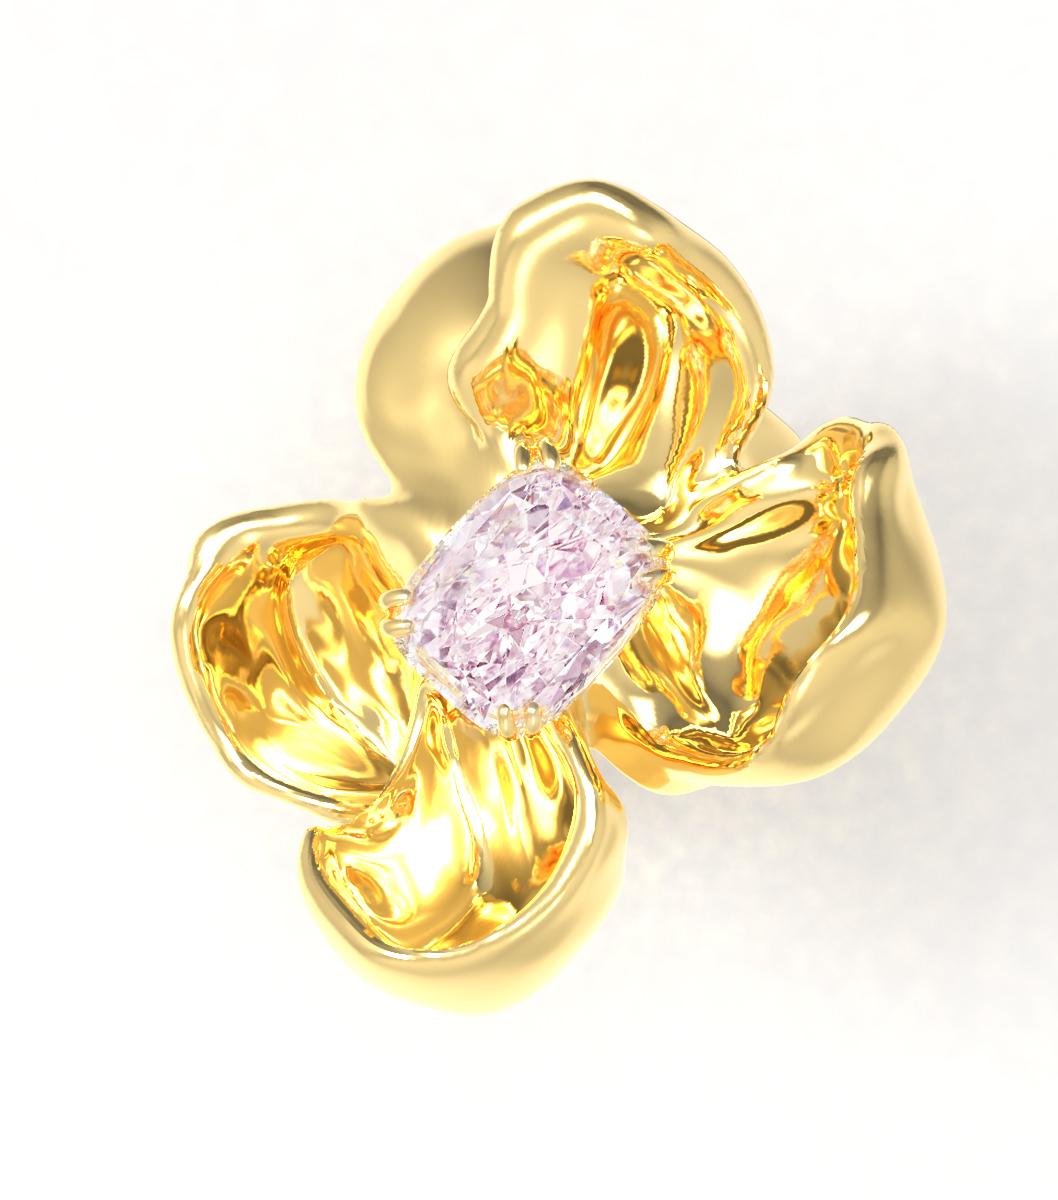 This Magnolia Flower Sculptural brooch is crafted in 18 karat yellow gold and features a large certified fancy light purplish pink diamond of excellent quality. The crushed ice cushion shape is the artist's favorite for displaying the tender color